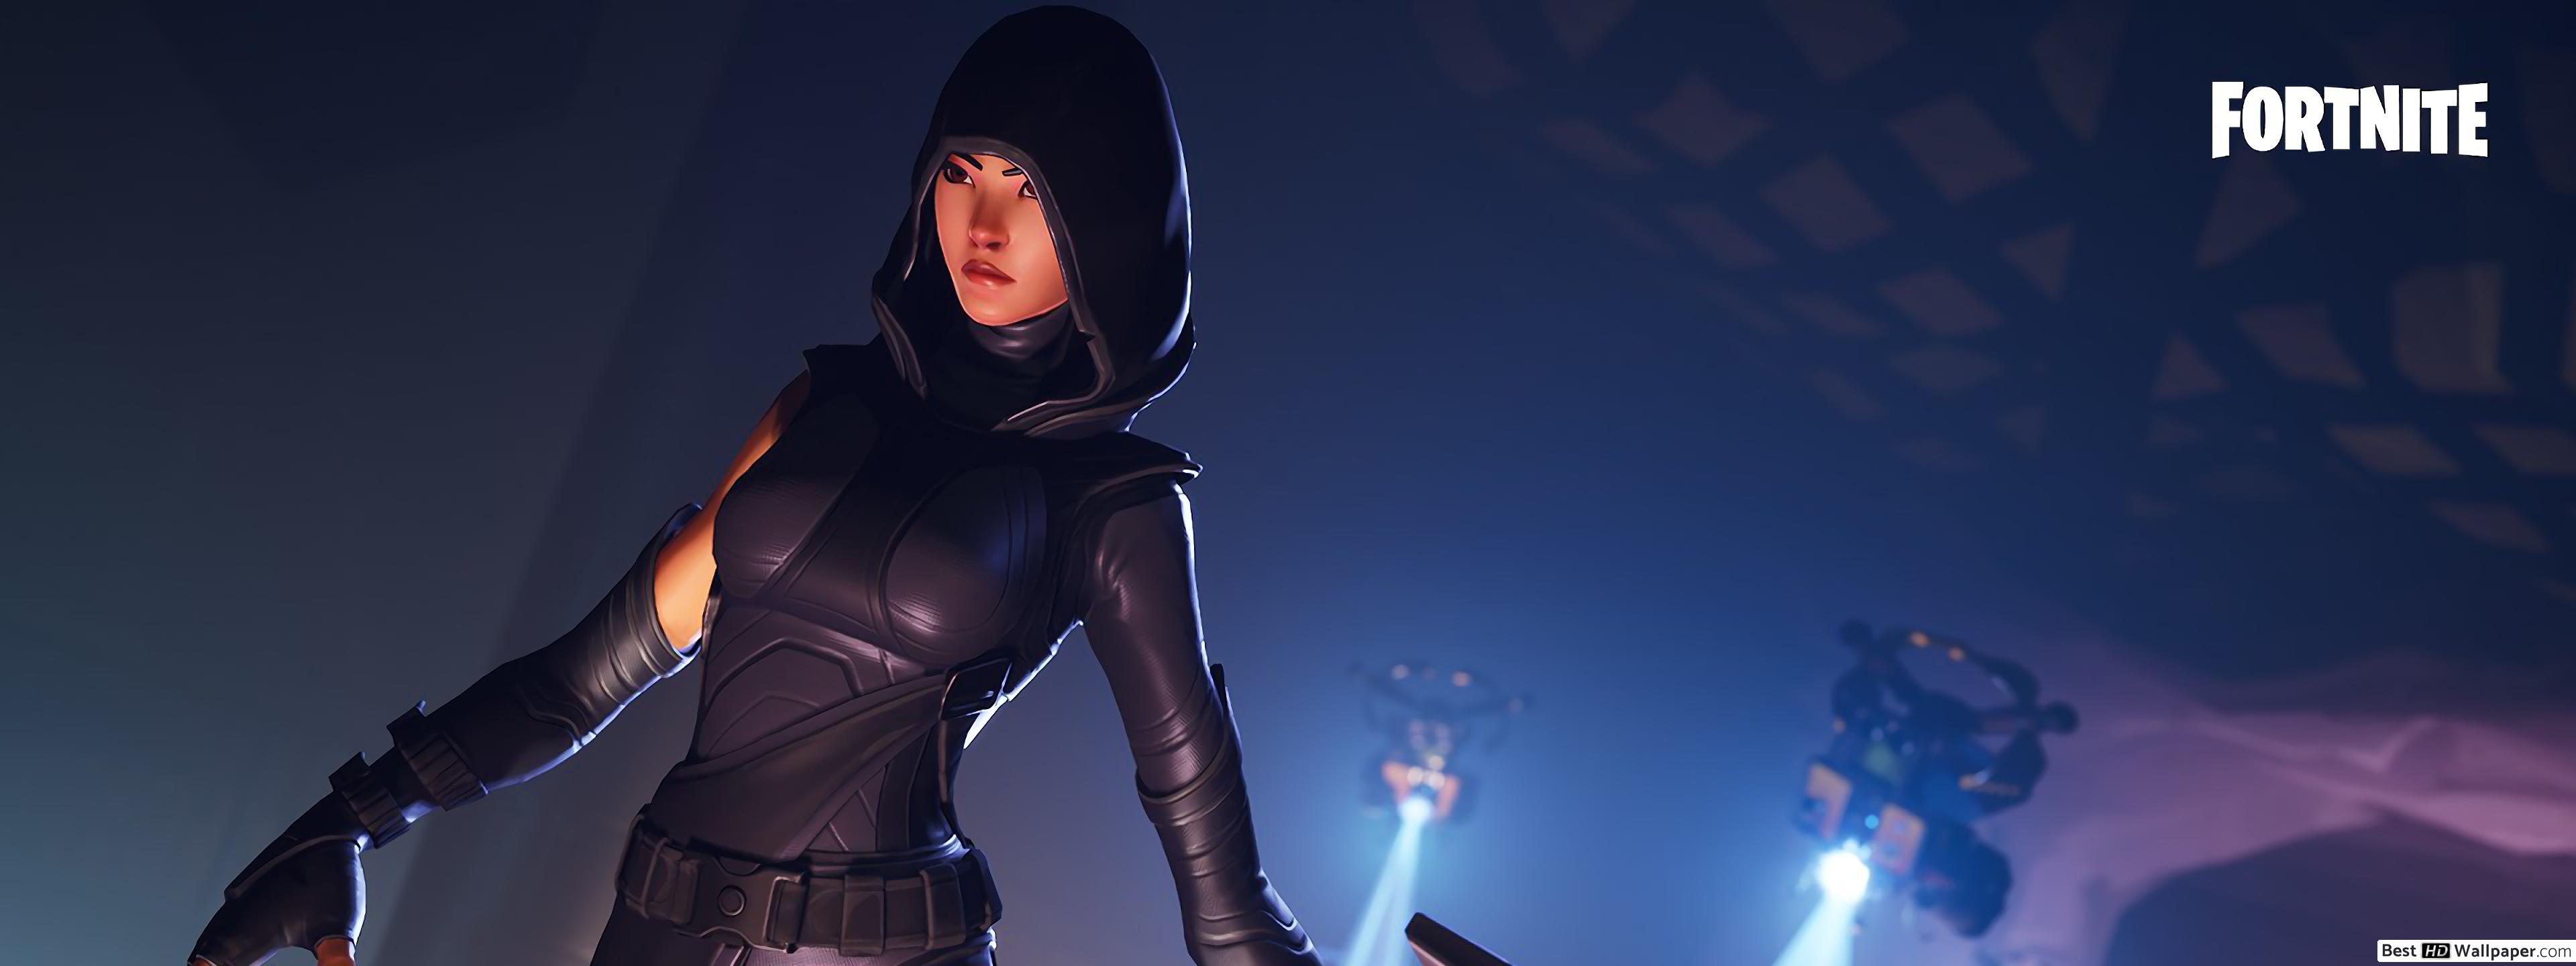 Fortnite fate outfit skin HD wallpaper download